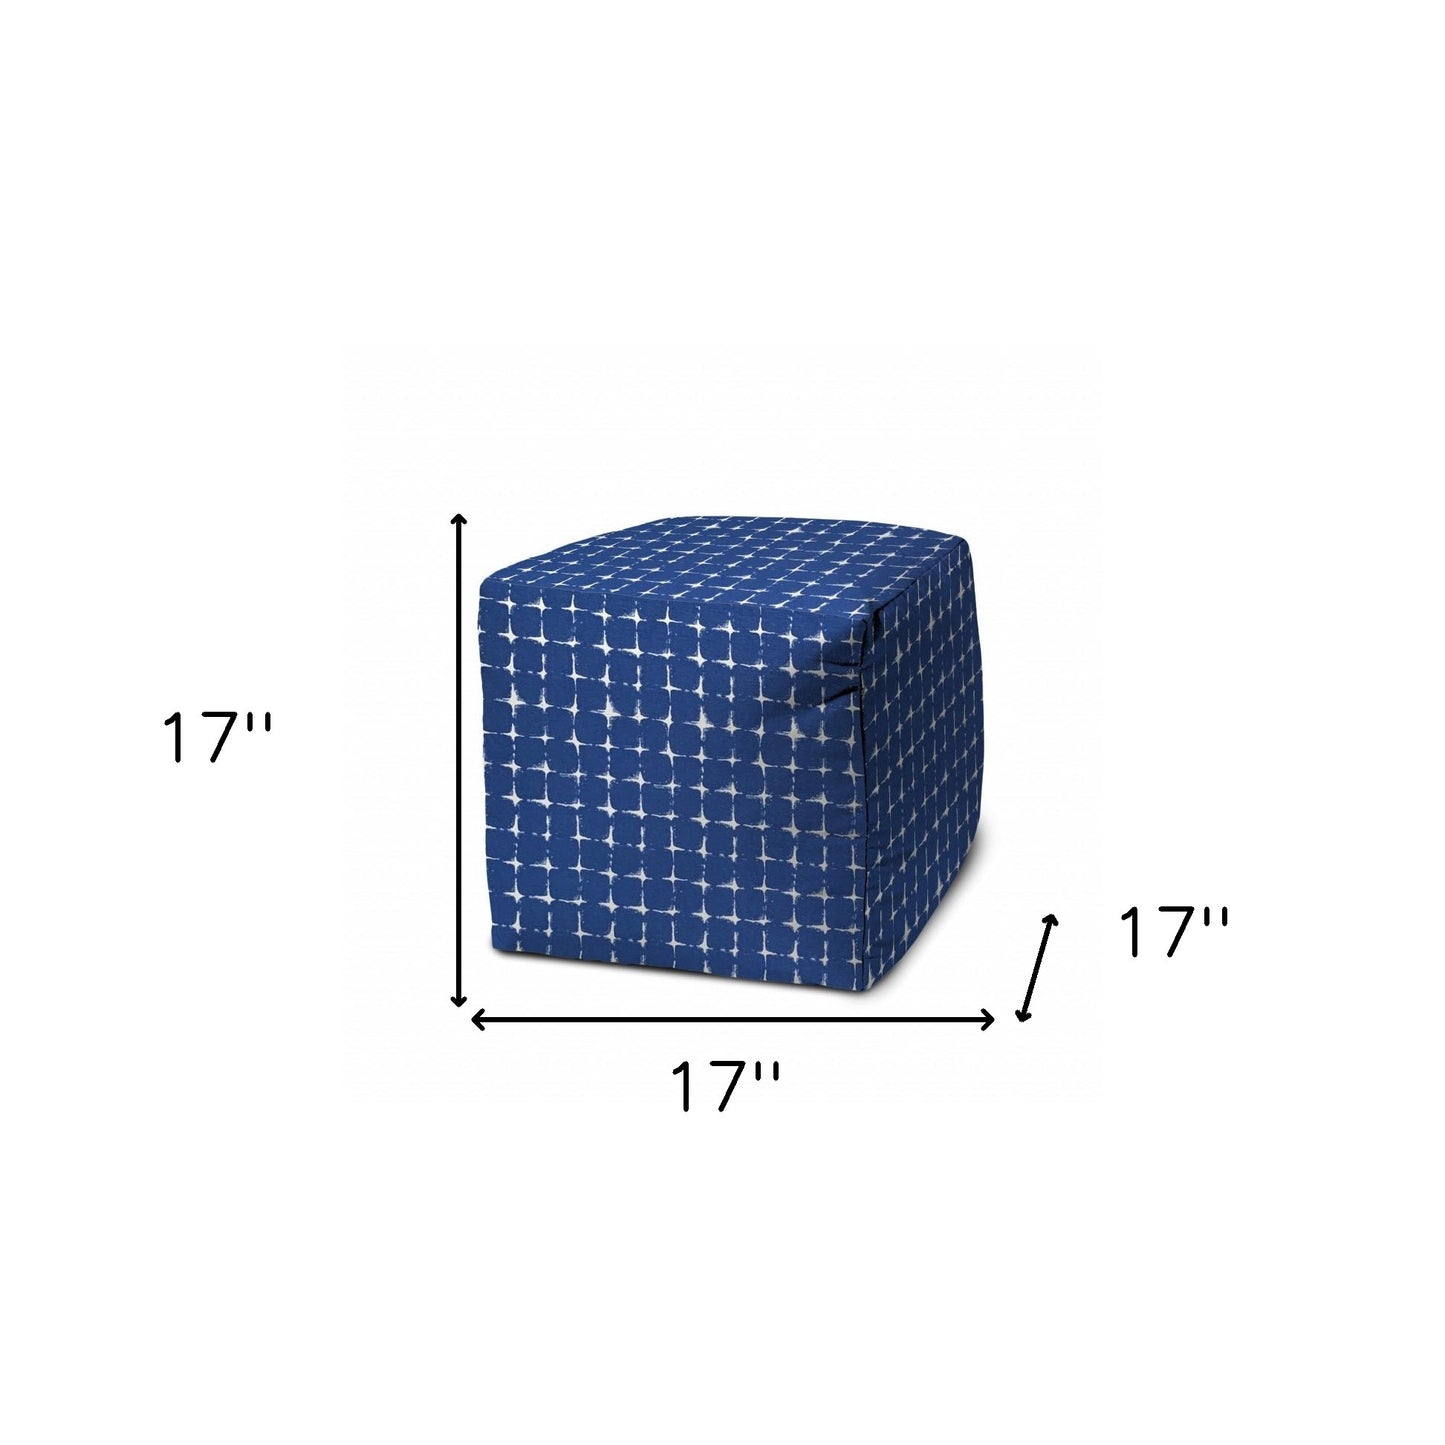 17" Blue and White Polyester Cube Geometric Indoor Outdoor Pouf Ottoman